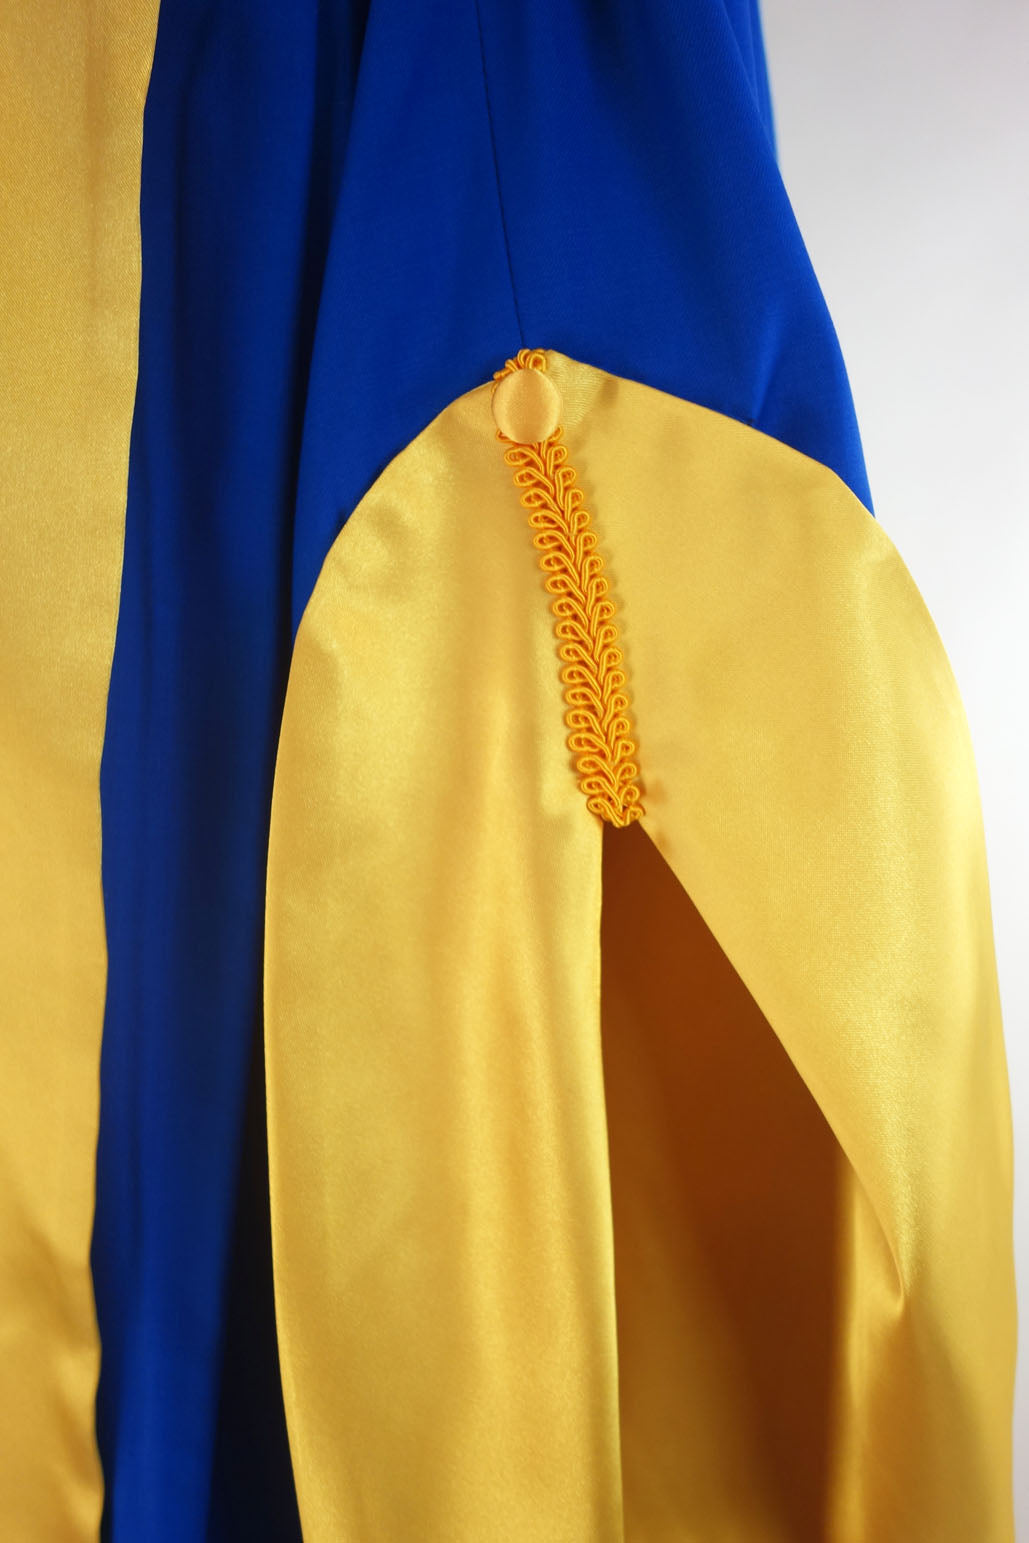 University of Canberra PhD Graduation Gown Set - Gown, Hood and Bonnet